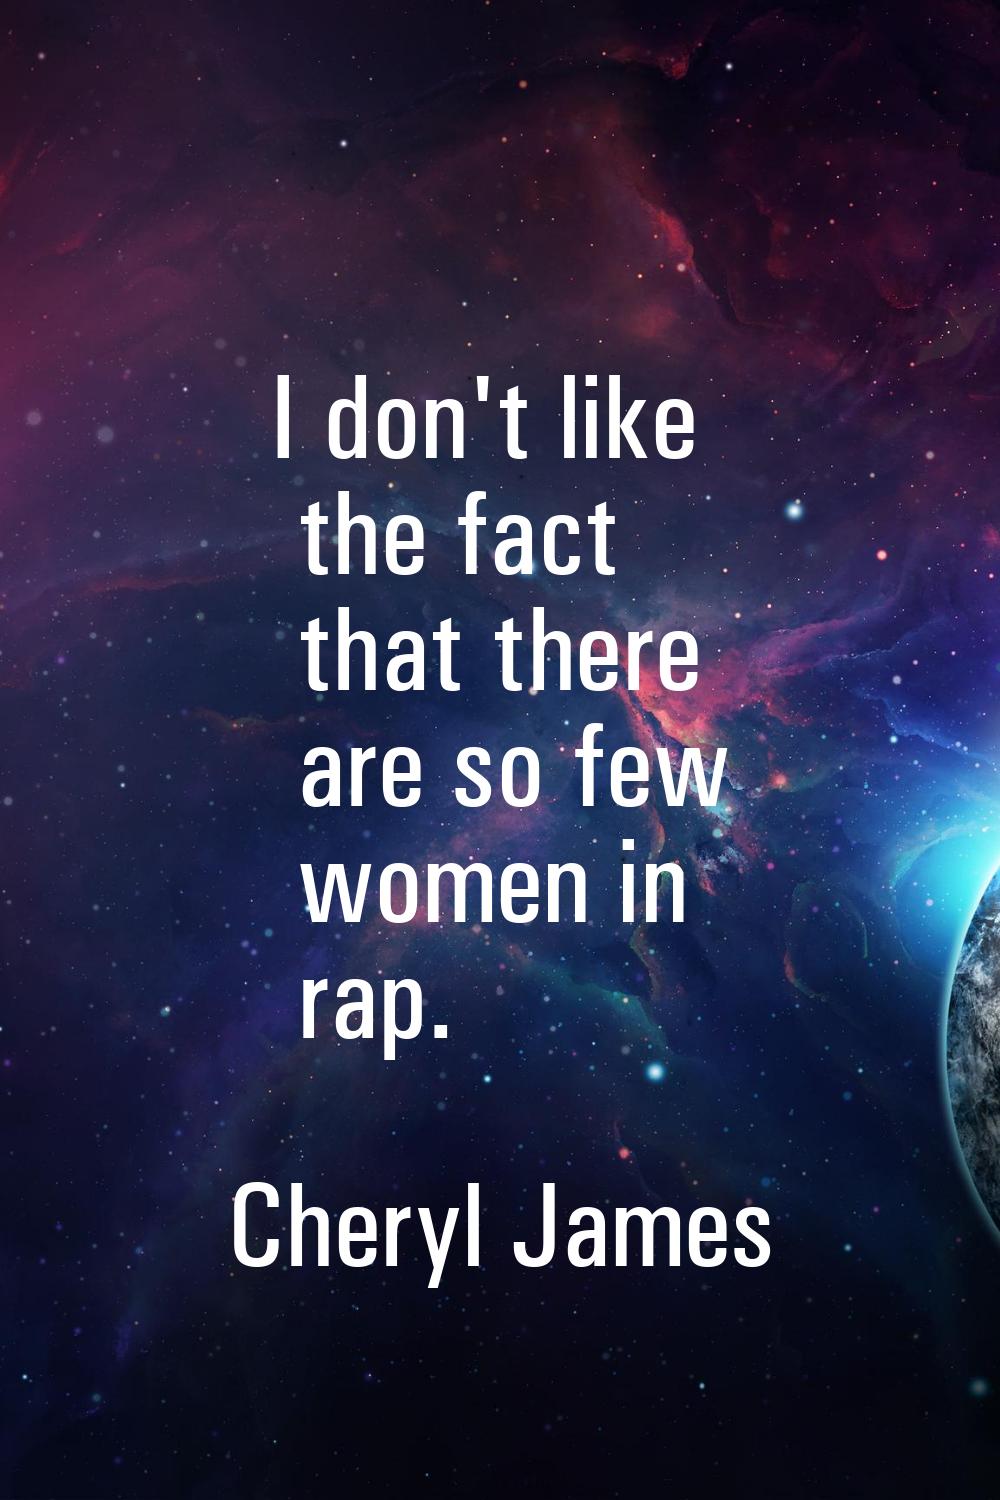 I don't like the fact that there are so few women in rap.